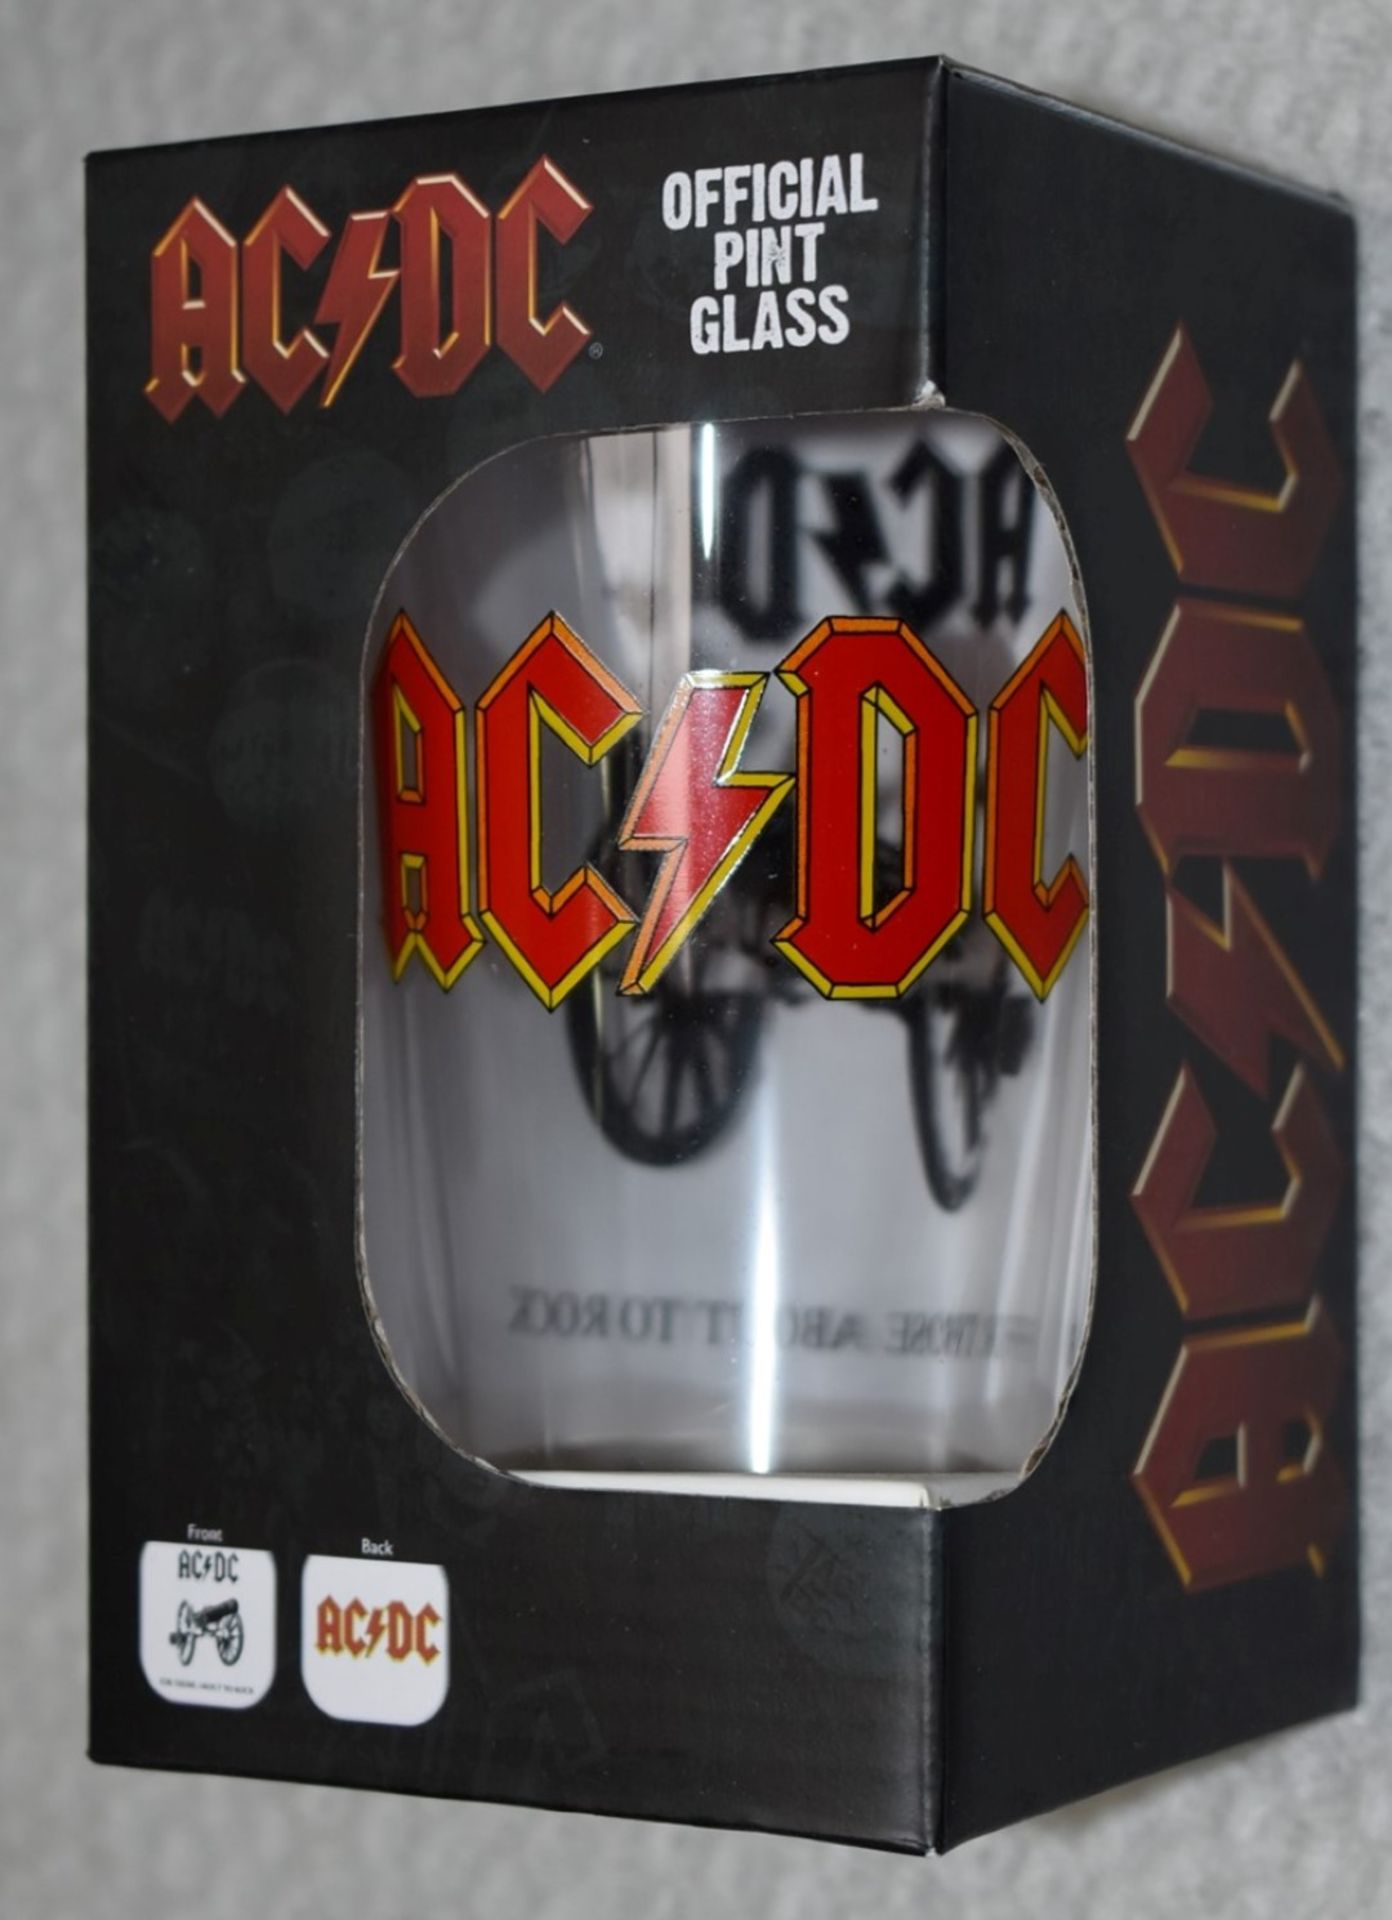 4 x Official ACDC Pint Glasses - Presented in Retail Packaging - Officially Licensed Merchandise - - Image 3 of 7